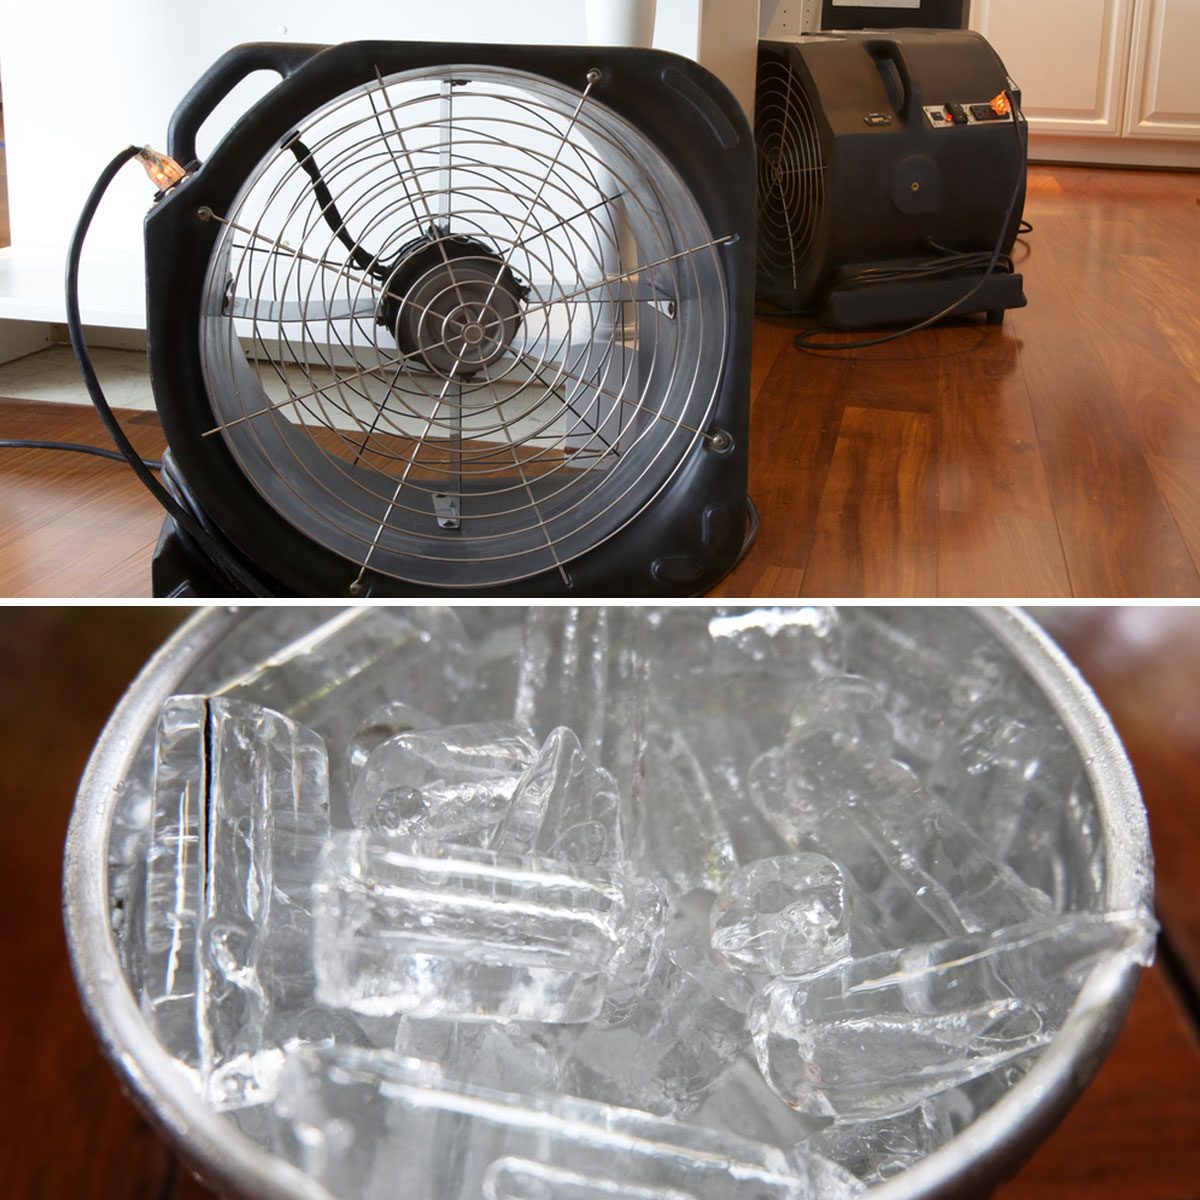 using ice and fan to cool room